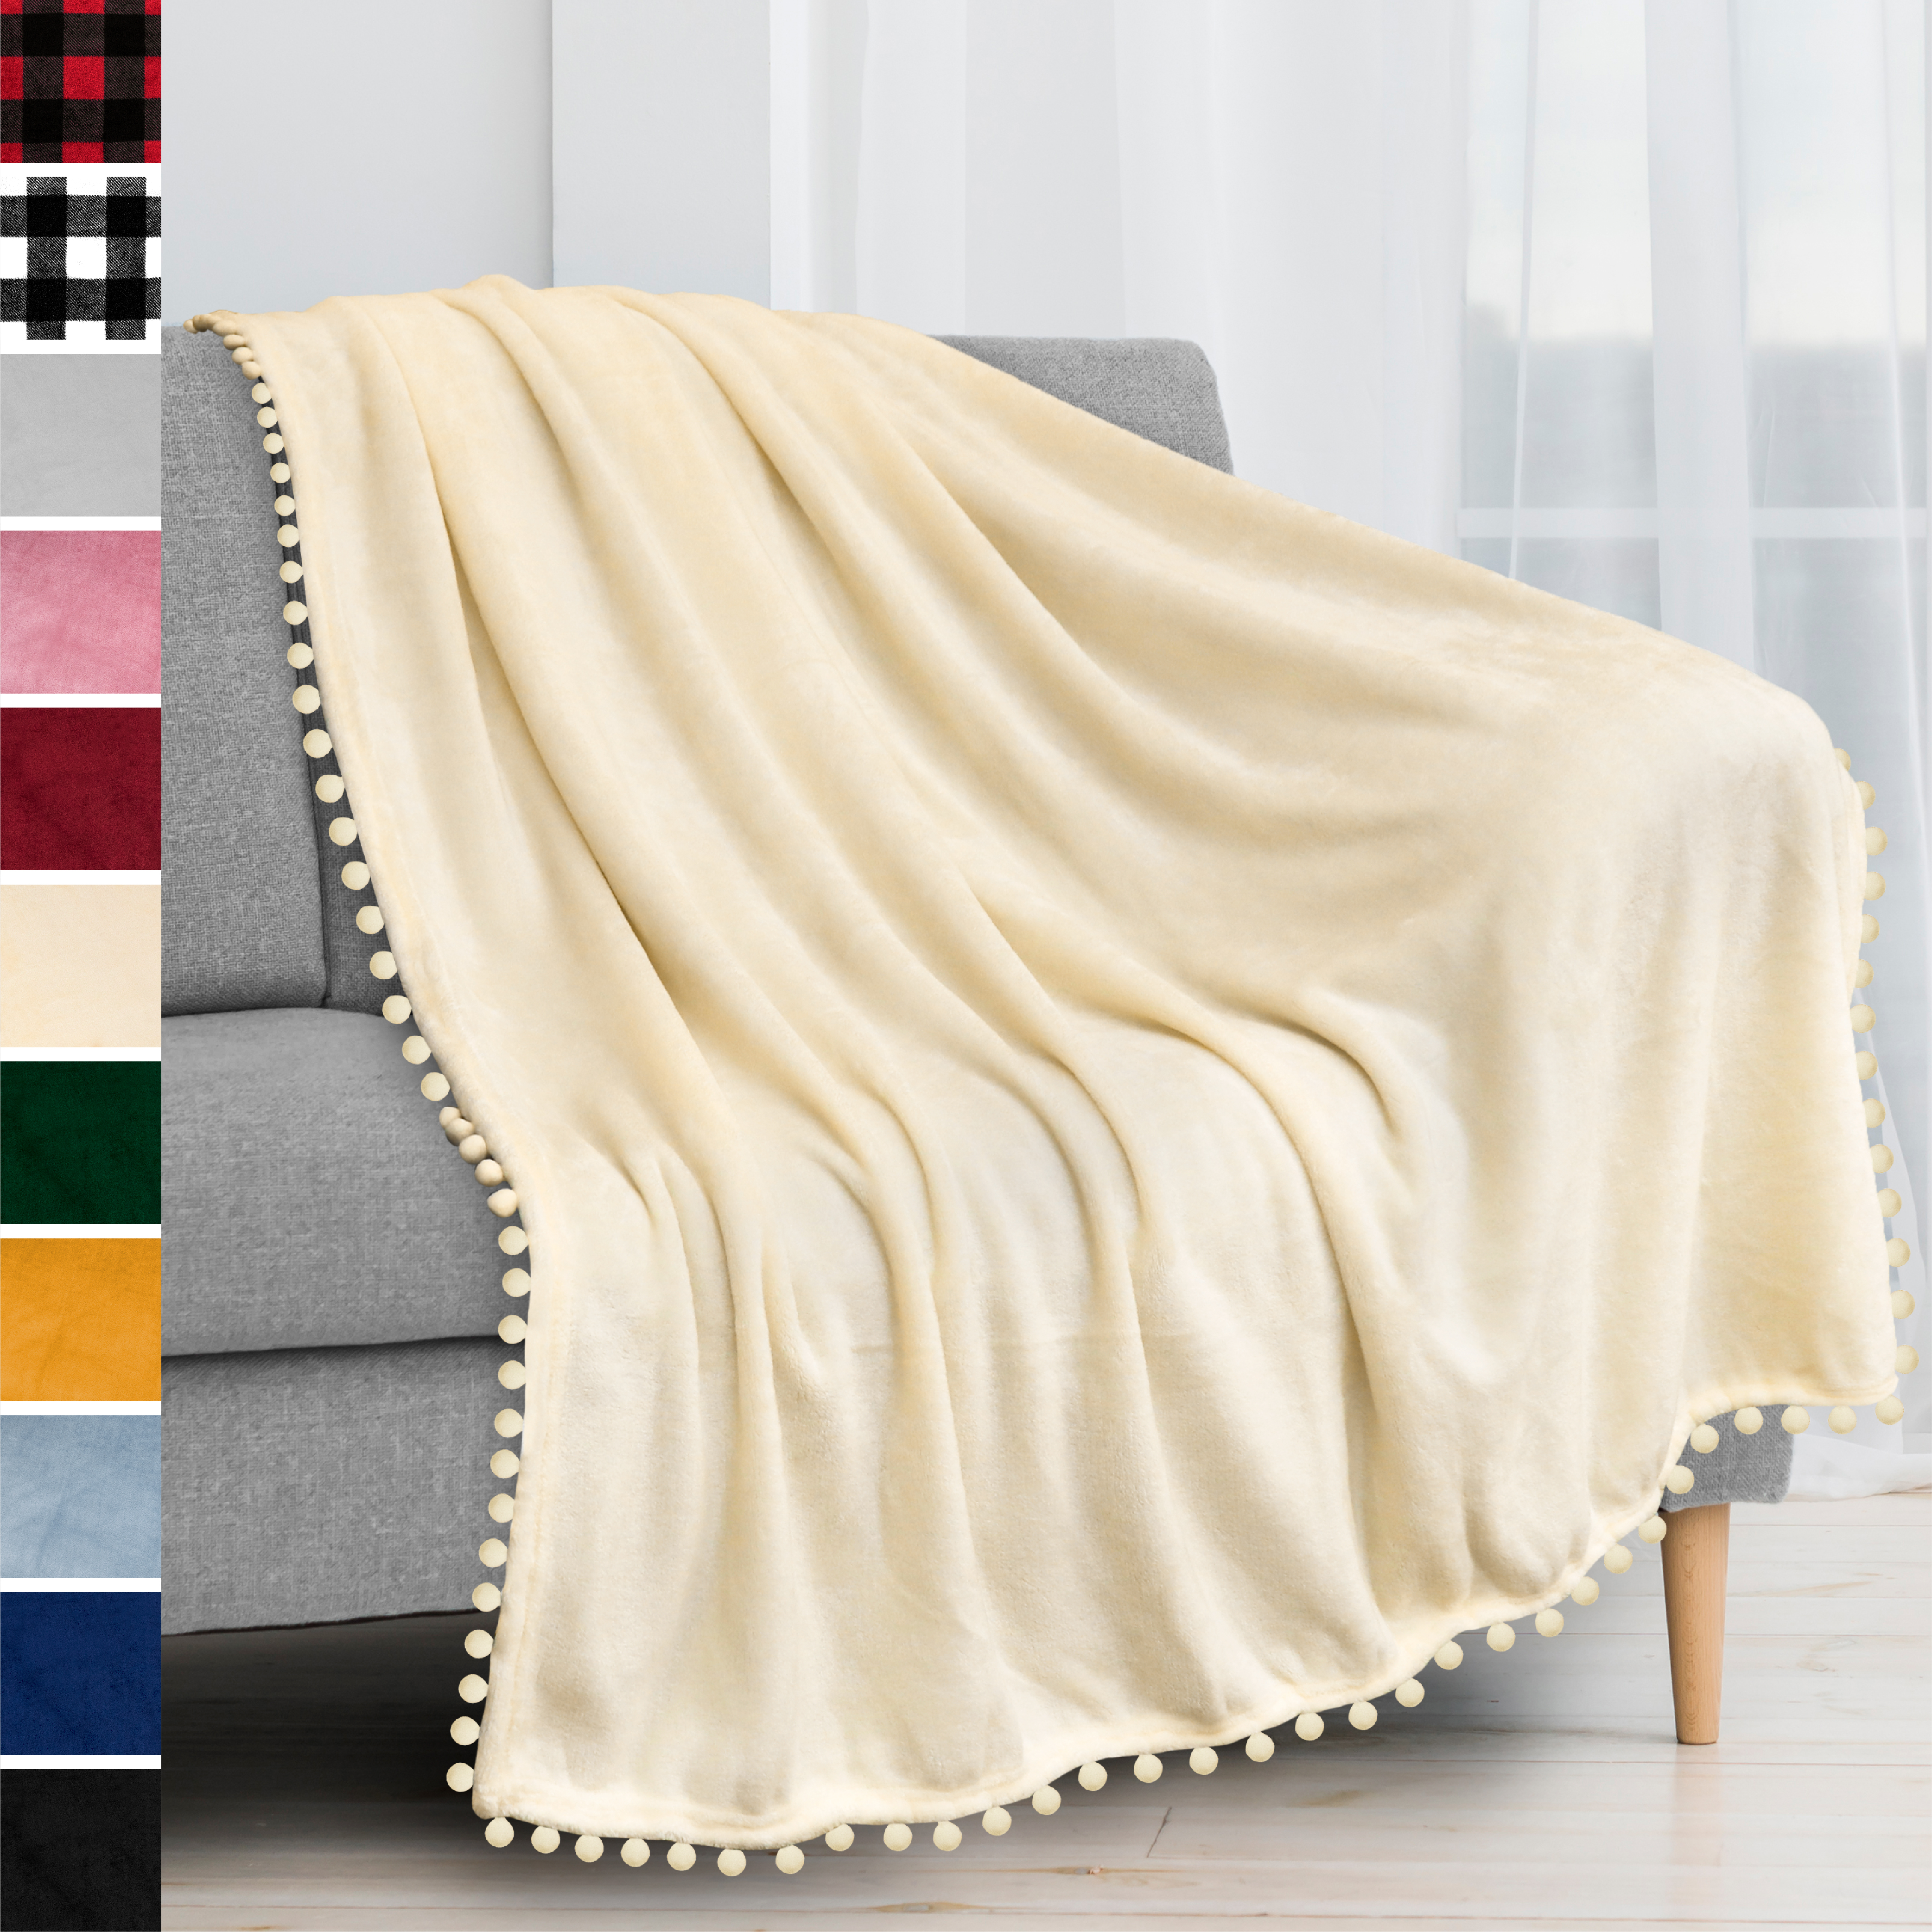 thumbnail 46 - Fleece Throw Blanket with Pom Pom Fringe Super Soft Lightweight Bed Couch Home